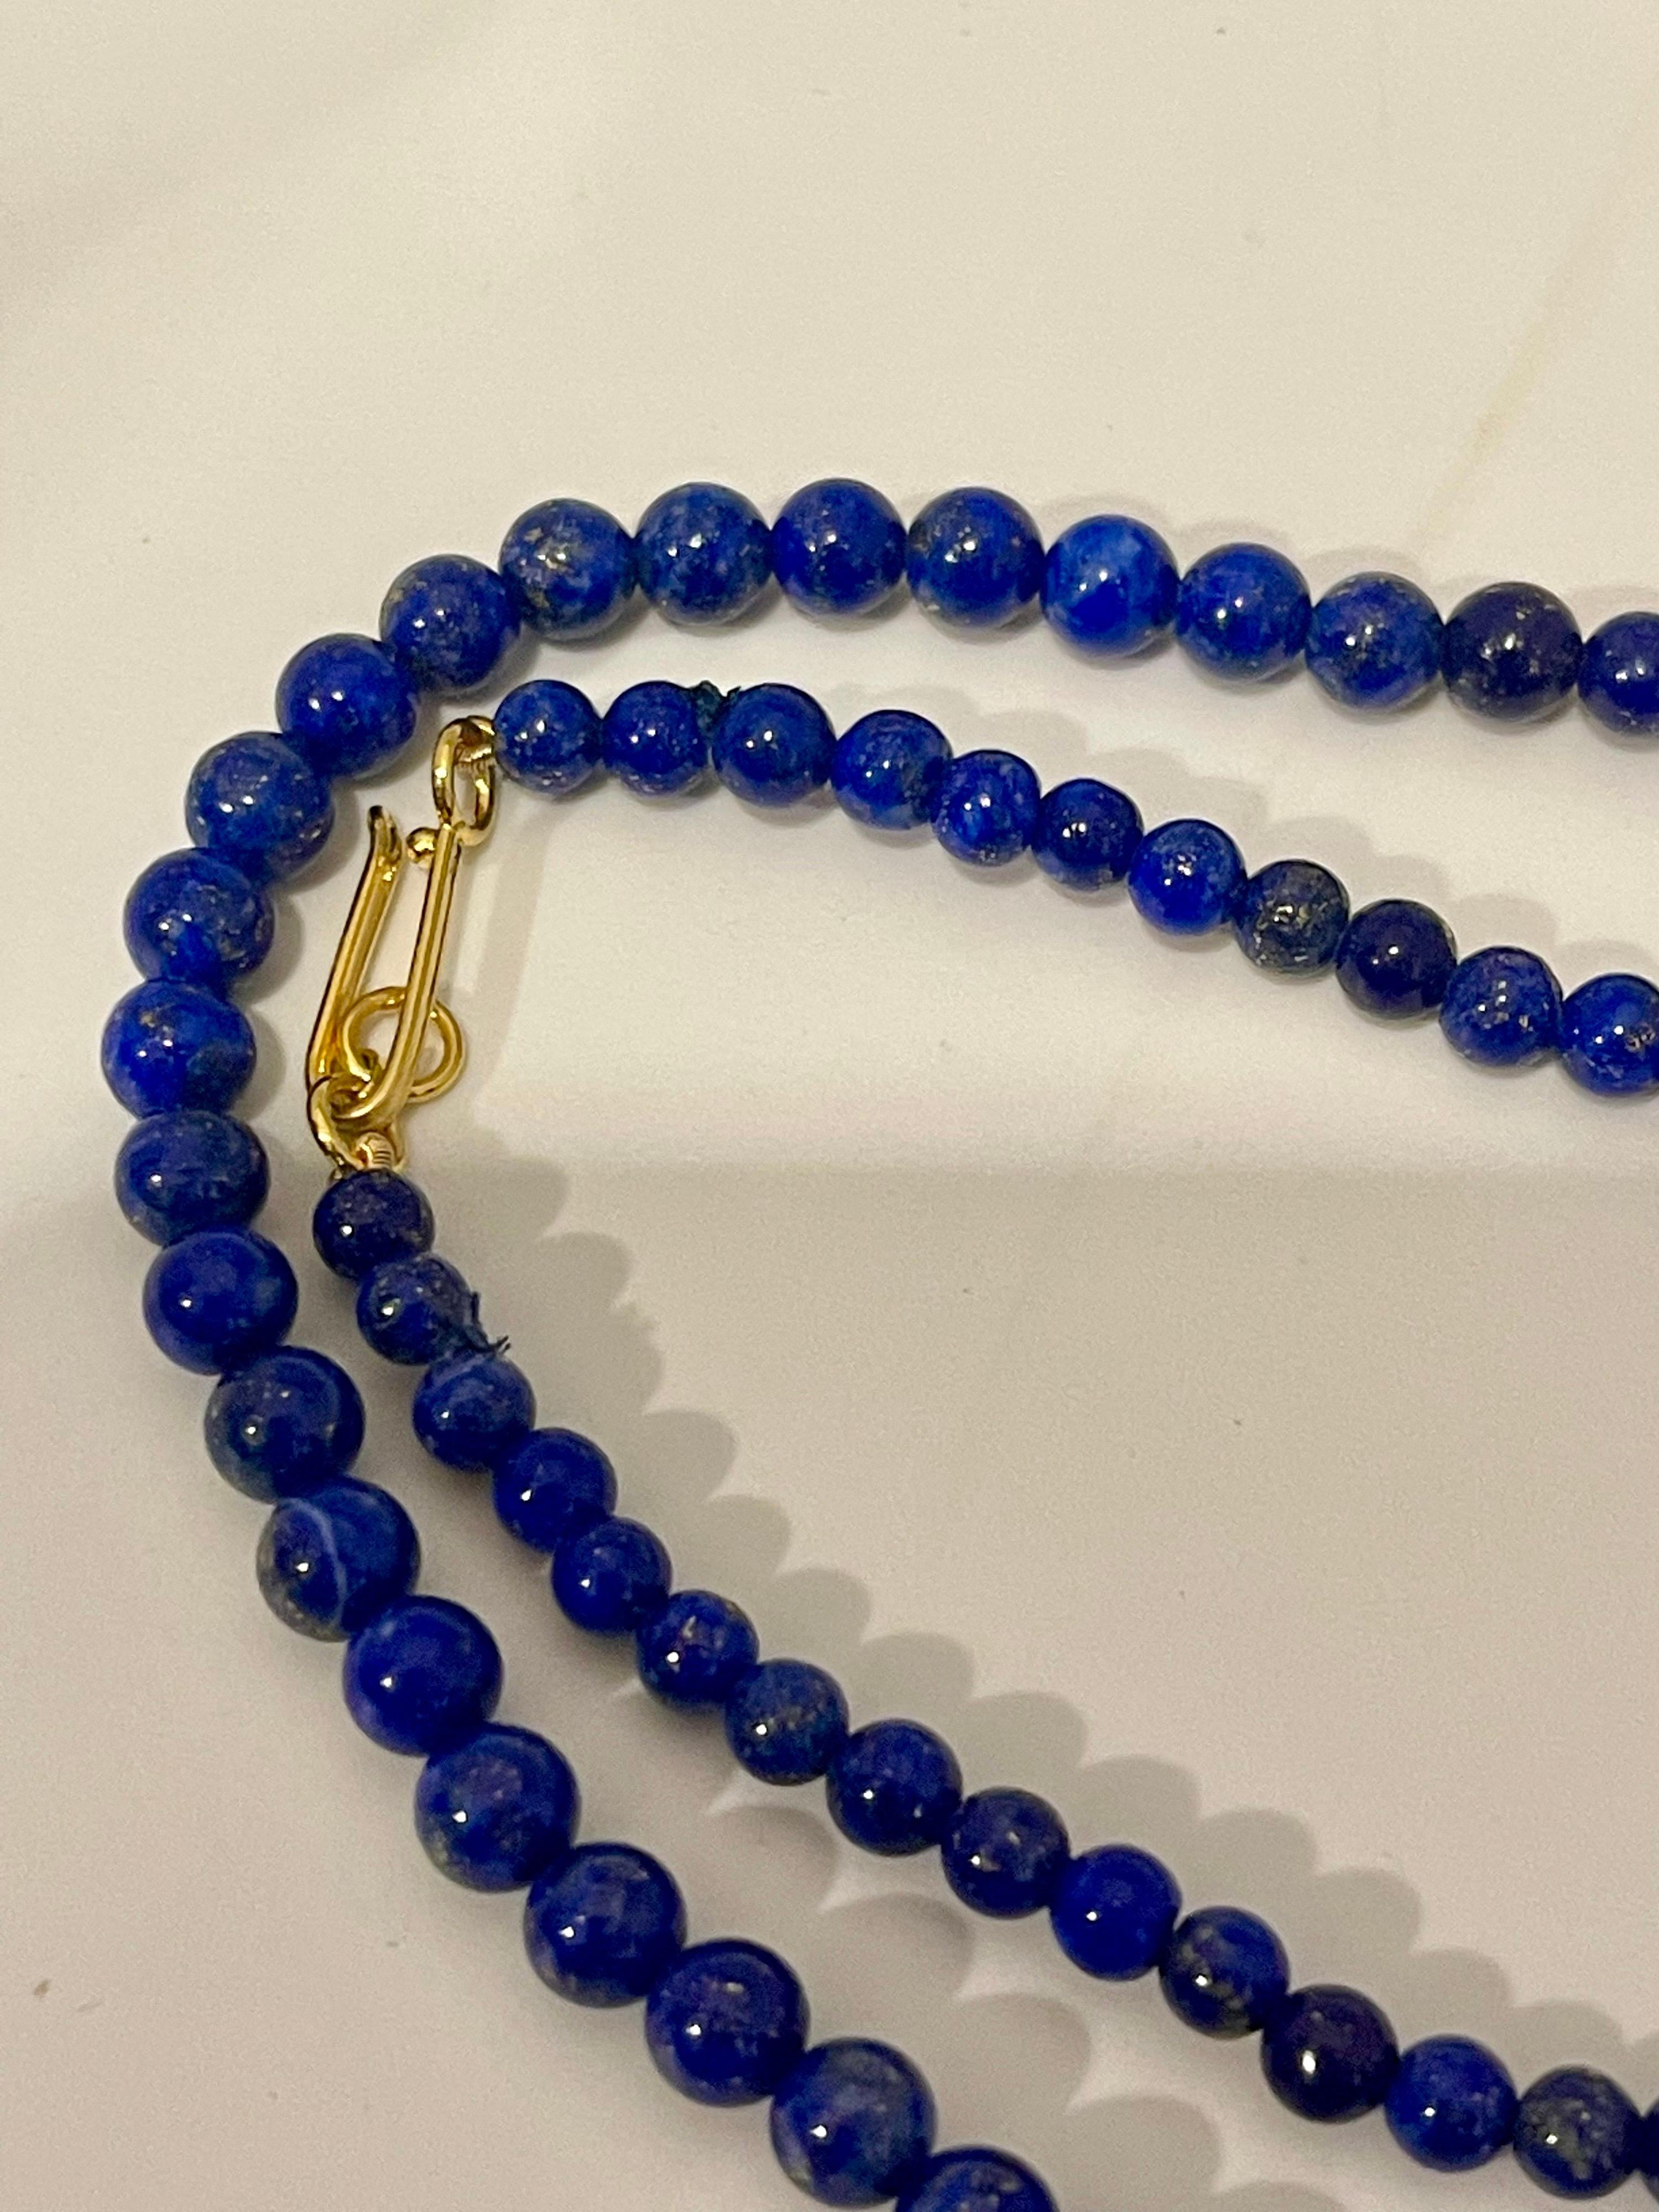 Vintage Lapis Lazuli Single Strand Necklace With 14 Karat Yellow Gold  heavy yellow gold Hook clasp 
This marvelous vintage Lapis Lazuli Graduating  necklace features 1 row of luscious  Beads
measuring approximately  5 to 6  mm Beads
strand is 20